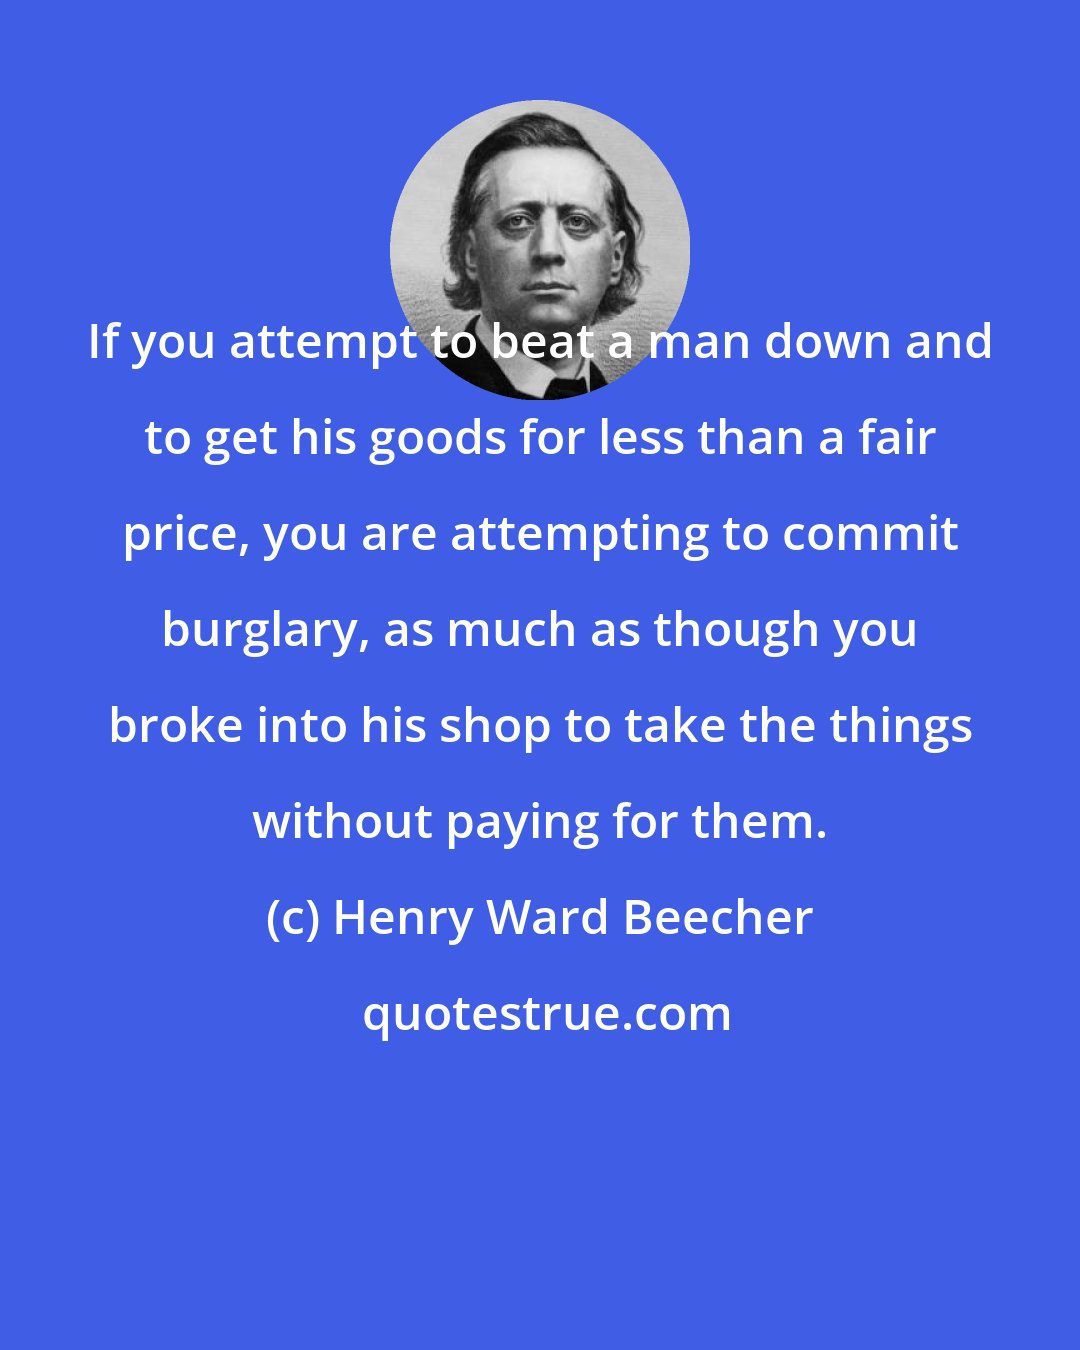 Henry Ward Beecher: If you attempt to beat a man down and to get his goods for less than a fair price, you are attempting to commit burglary, as much as though you broke into his shop to take the things without paying for them.